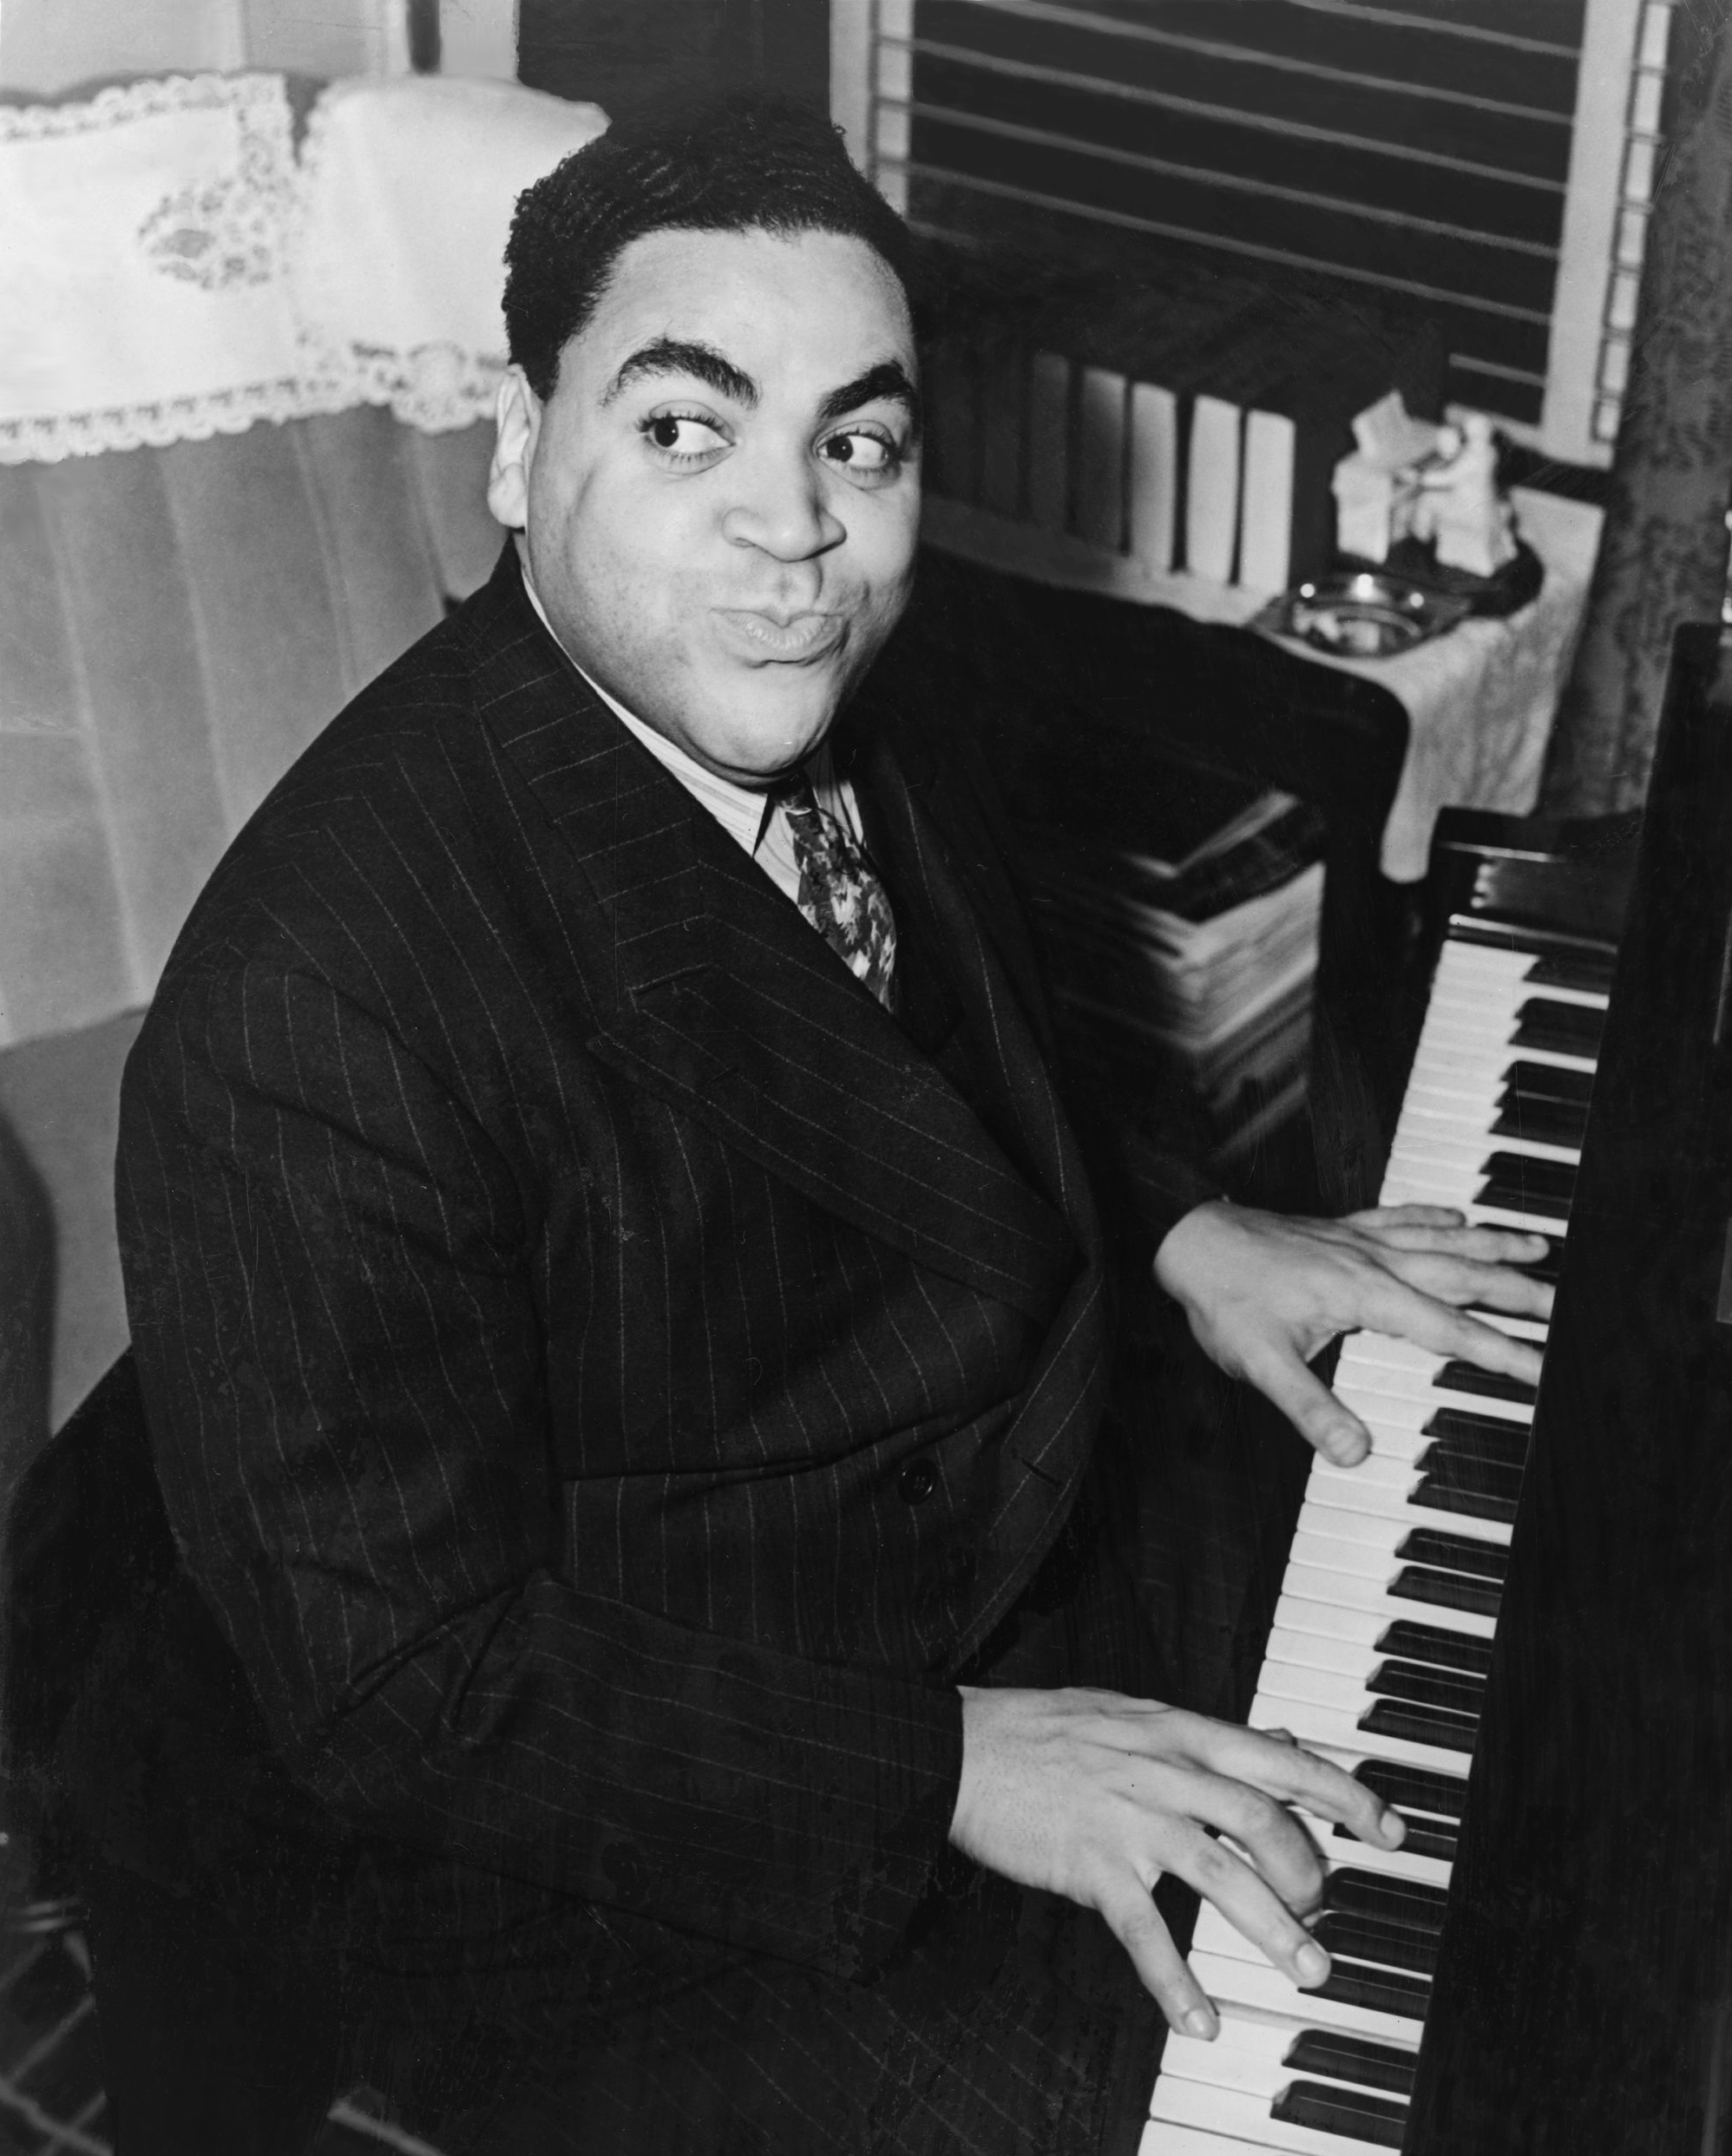 Picture of Fats Waller playing piano.